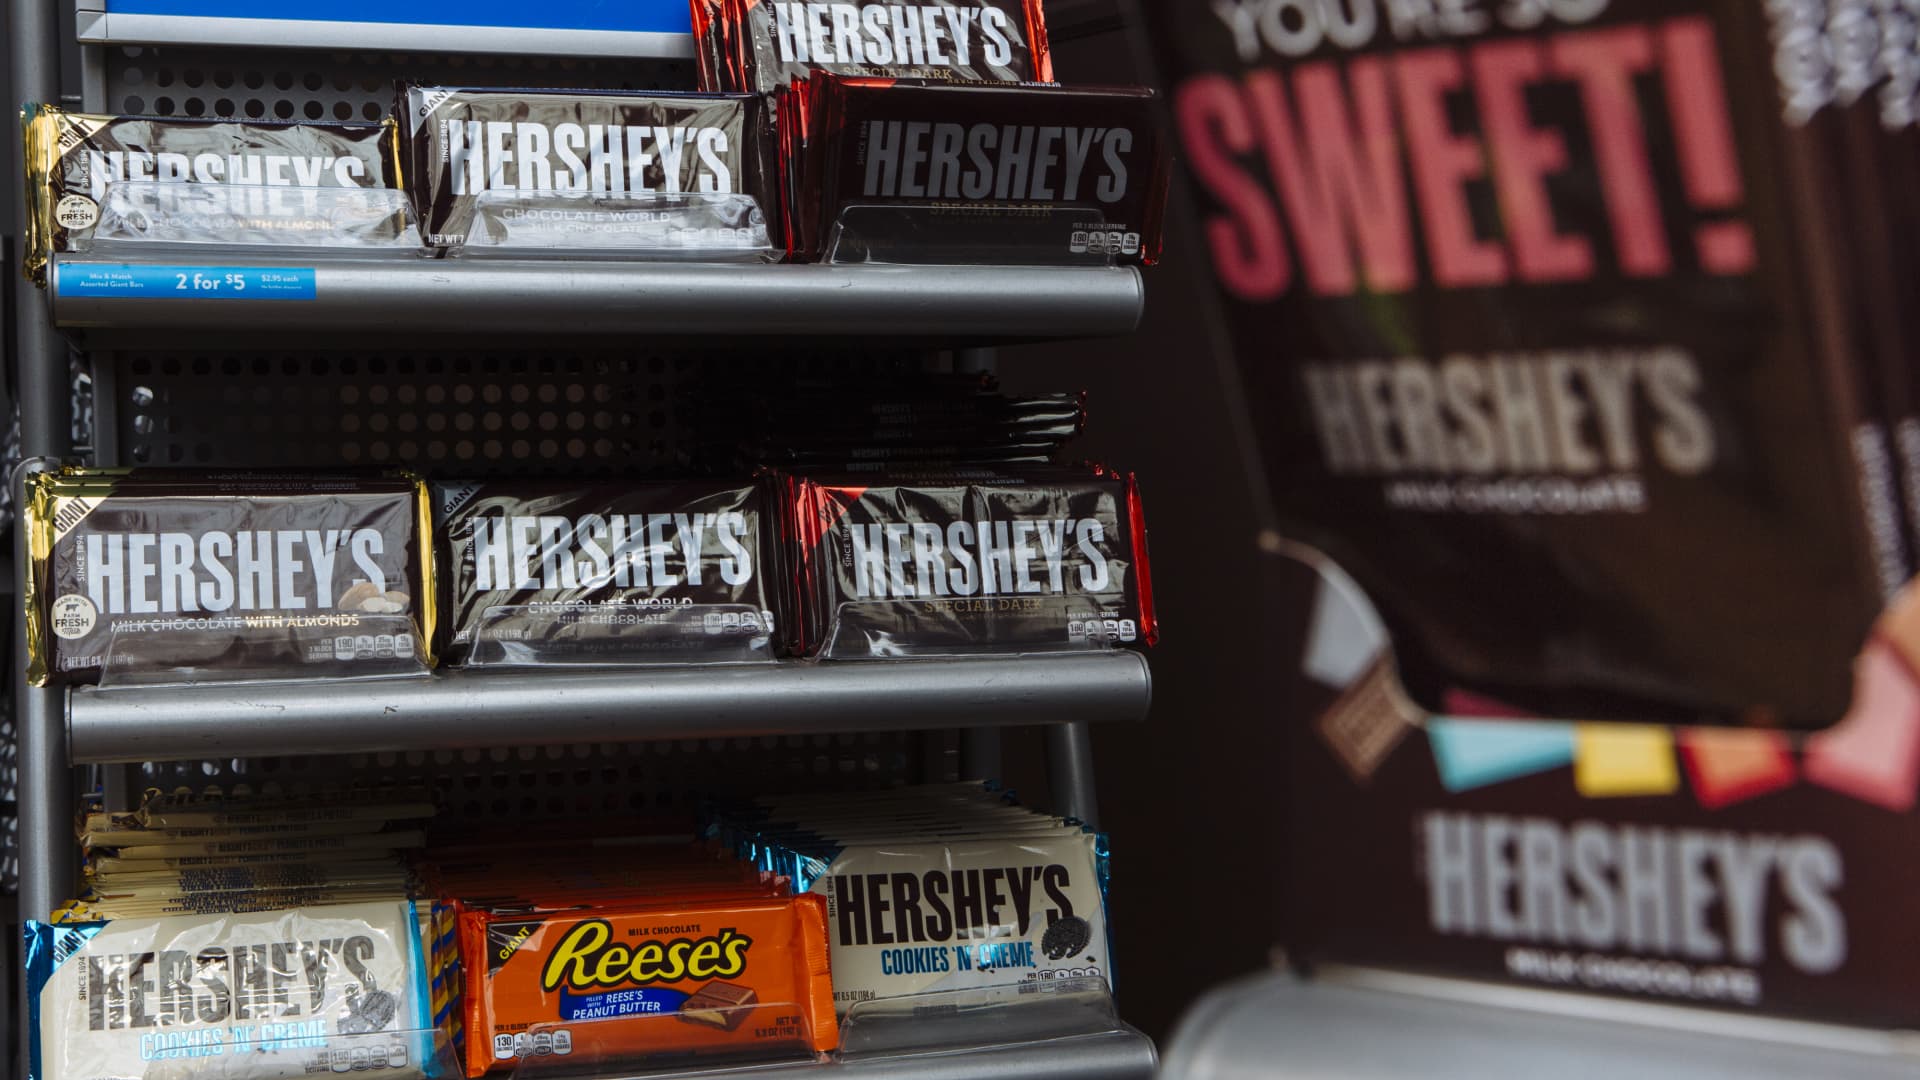 Jim Cramer says he would buy Hershey stock now and down on the ‘next inflation scare’